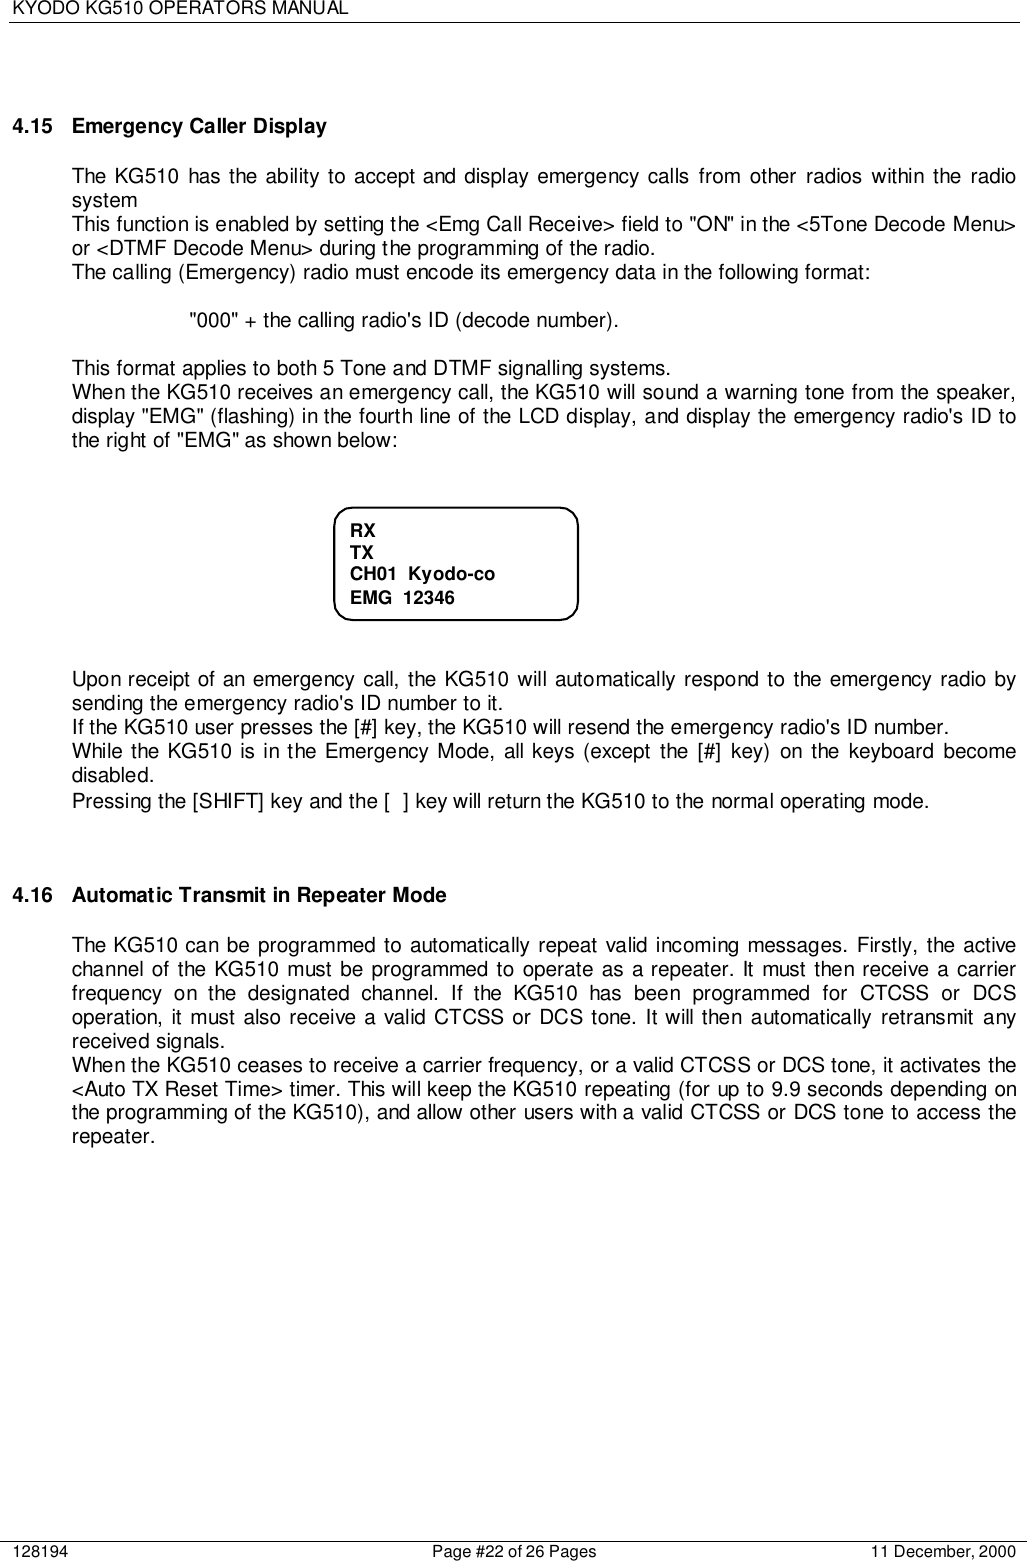 KYODO KG510 OPERATORS MANUAL128194 Page #22 of 26 Pages 11 December, 20004.15  Emergency Caller DisplayThe KG510 has the ability to accept and display emergency calls from other radios within the radiosystemThis function is enabled by setting the &lt;Emg Call Receive&gt; field to &quot;ON&quot; in the &lt;5Tone Decode Menu&gt;or &lt;DTMF Decode Menu&gt; during the programming of the radio.The calling (Emergency) radio must encode its emergency data in the following format:&quot;000&quot; + the calling radio&apos;s ID (decode number).This format applies to both 5 Tone and DTMF signalling systems.When the KG510 receives an emergency call, the KG510 will sound a warning tone from the speaker,display &quot;EMG&quot; (flashing) in the fourth line of the LCD display, and display the emergency radio&apos;s ID tothe right of &quot;EMG&quot; as shown below:Upon receipt of an emergency call, the KG510 will automatically respond to the emergency radio bysending the emergency radio&apos;s ID number to it.If the KG510 user presses the [#] key, the KG510 will resend the emergency radio&apos;s ID number.While the KG510 is in the Emergency Mode, all keys (except the [#] key) on the keyboard becomedisabled.Pressing the [SHIFT] key and the [ ] key will return the KG510 to the normal operating mode.4.16  Automatic Transmit in Repeater ModeThe KG510 can be programmed to automatically repeat valid incoming messages. Firstly, the activechannel of the KG510 must be programmed to operate as a repeater. It must then receive a carrierfrequency on the designated channel. If the KG510 has been programmed for CTCSS or DCSoperation, it must also receive a valid CTCSS or DCS tone. It will then automatically retransmit anyreceived signals.When the KG510 ceases to receive a carrier frequency, or a valid CTCSS or DCS tone, it activates the&lt;Auto TX Reset Time&gt; timer. This will keep the KG510 repeating (for up to 9.9 seconds depending onthe programming of the KG510), and allow other users with a valid CTCSS or DCS tone to access therepeater.RXTXCH01  Kyodo-coEMG  12346